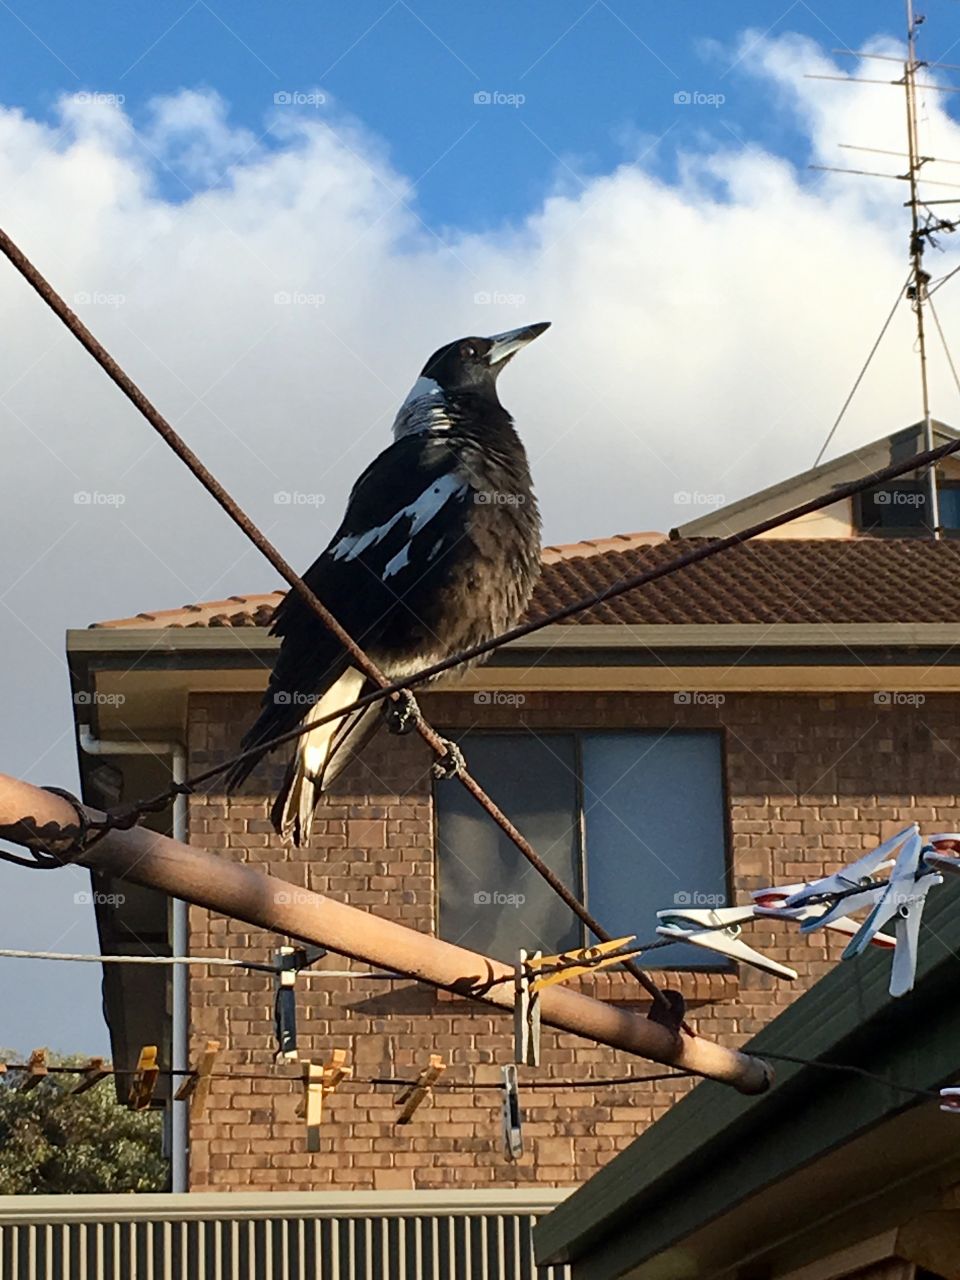 Magpie perched high on clothesline facing rising morning sun